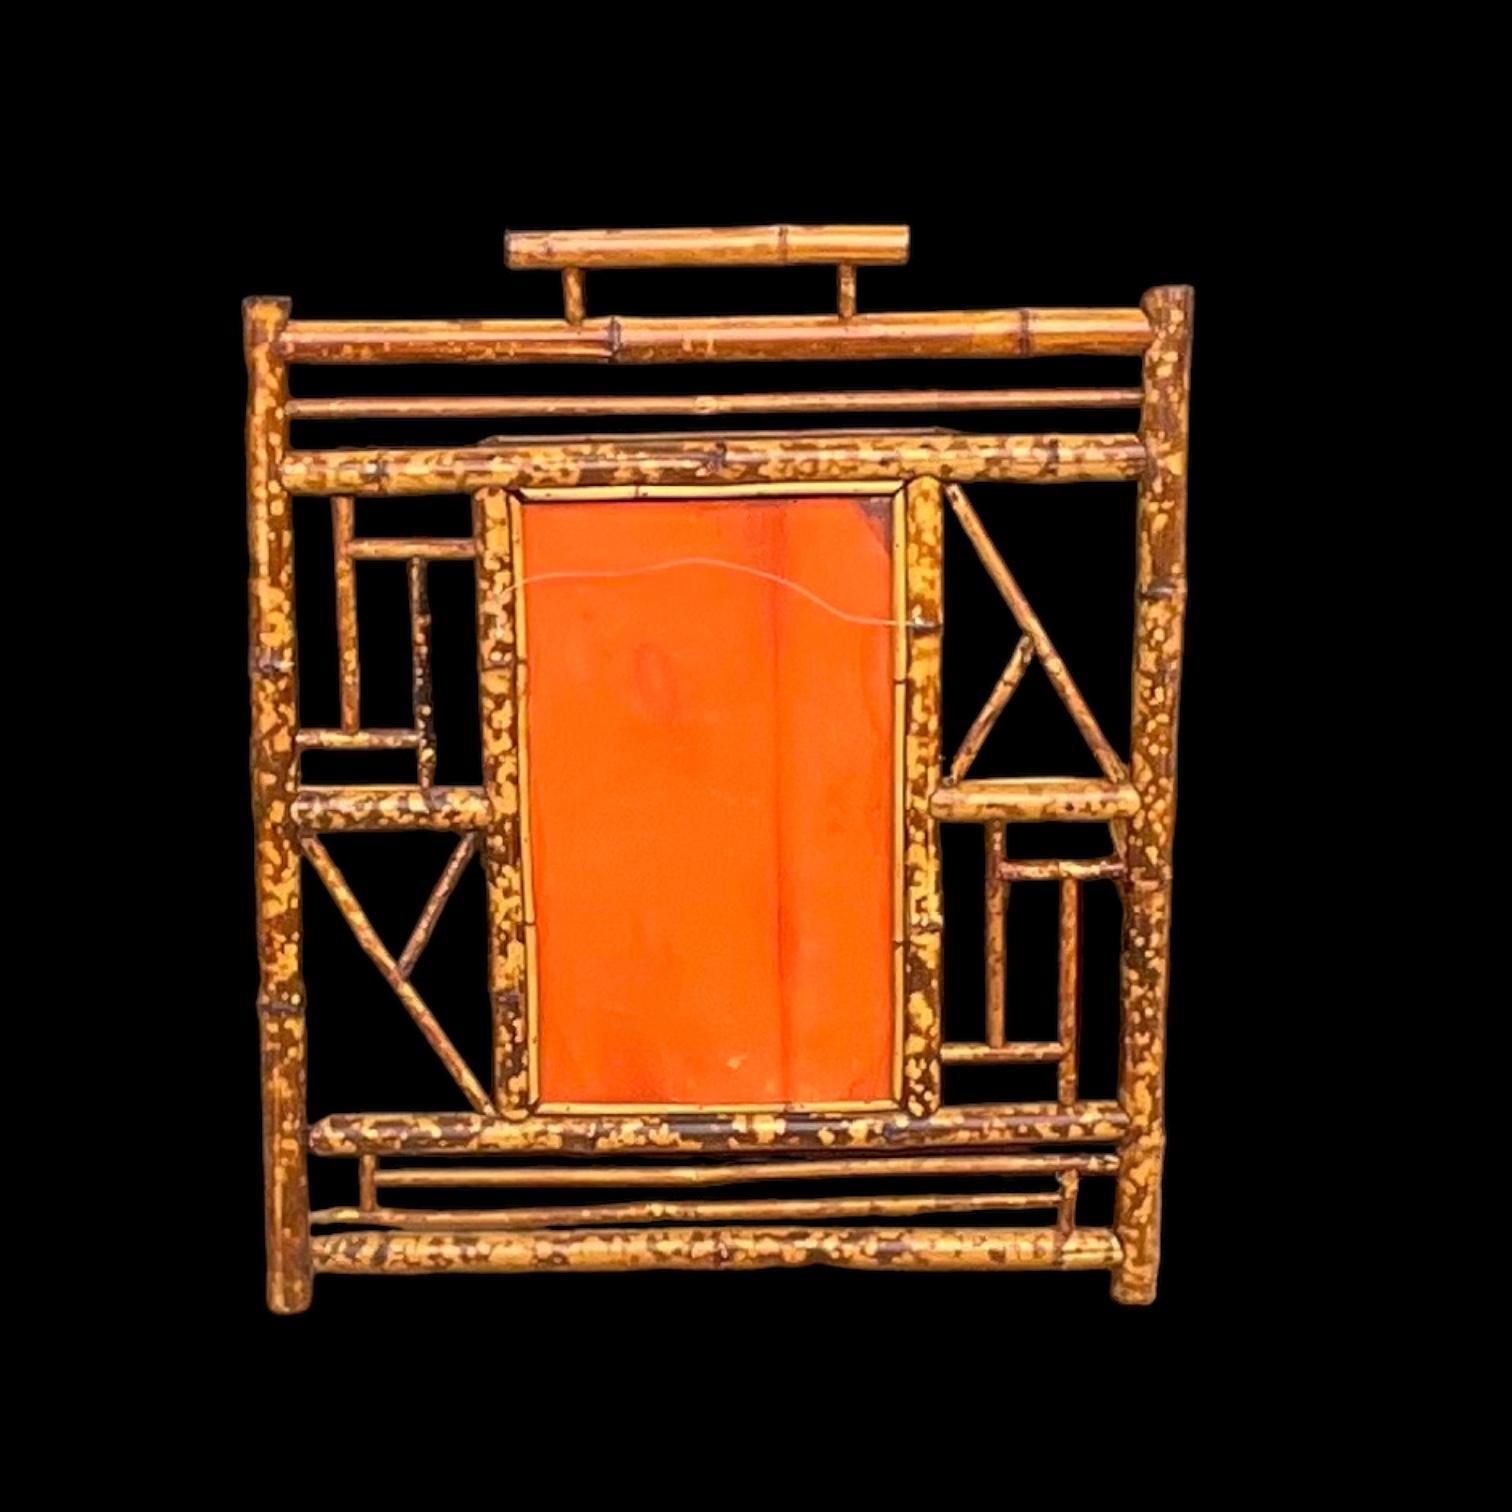 19th Century 19th-C. English Aesthetic Movement Bamboo & Lacquer Wall Shelf W/ Mirror For Sale